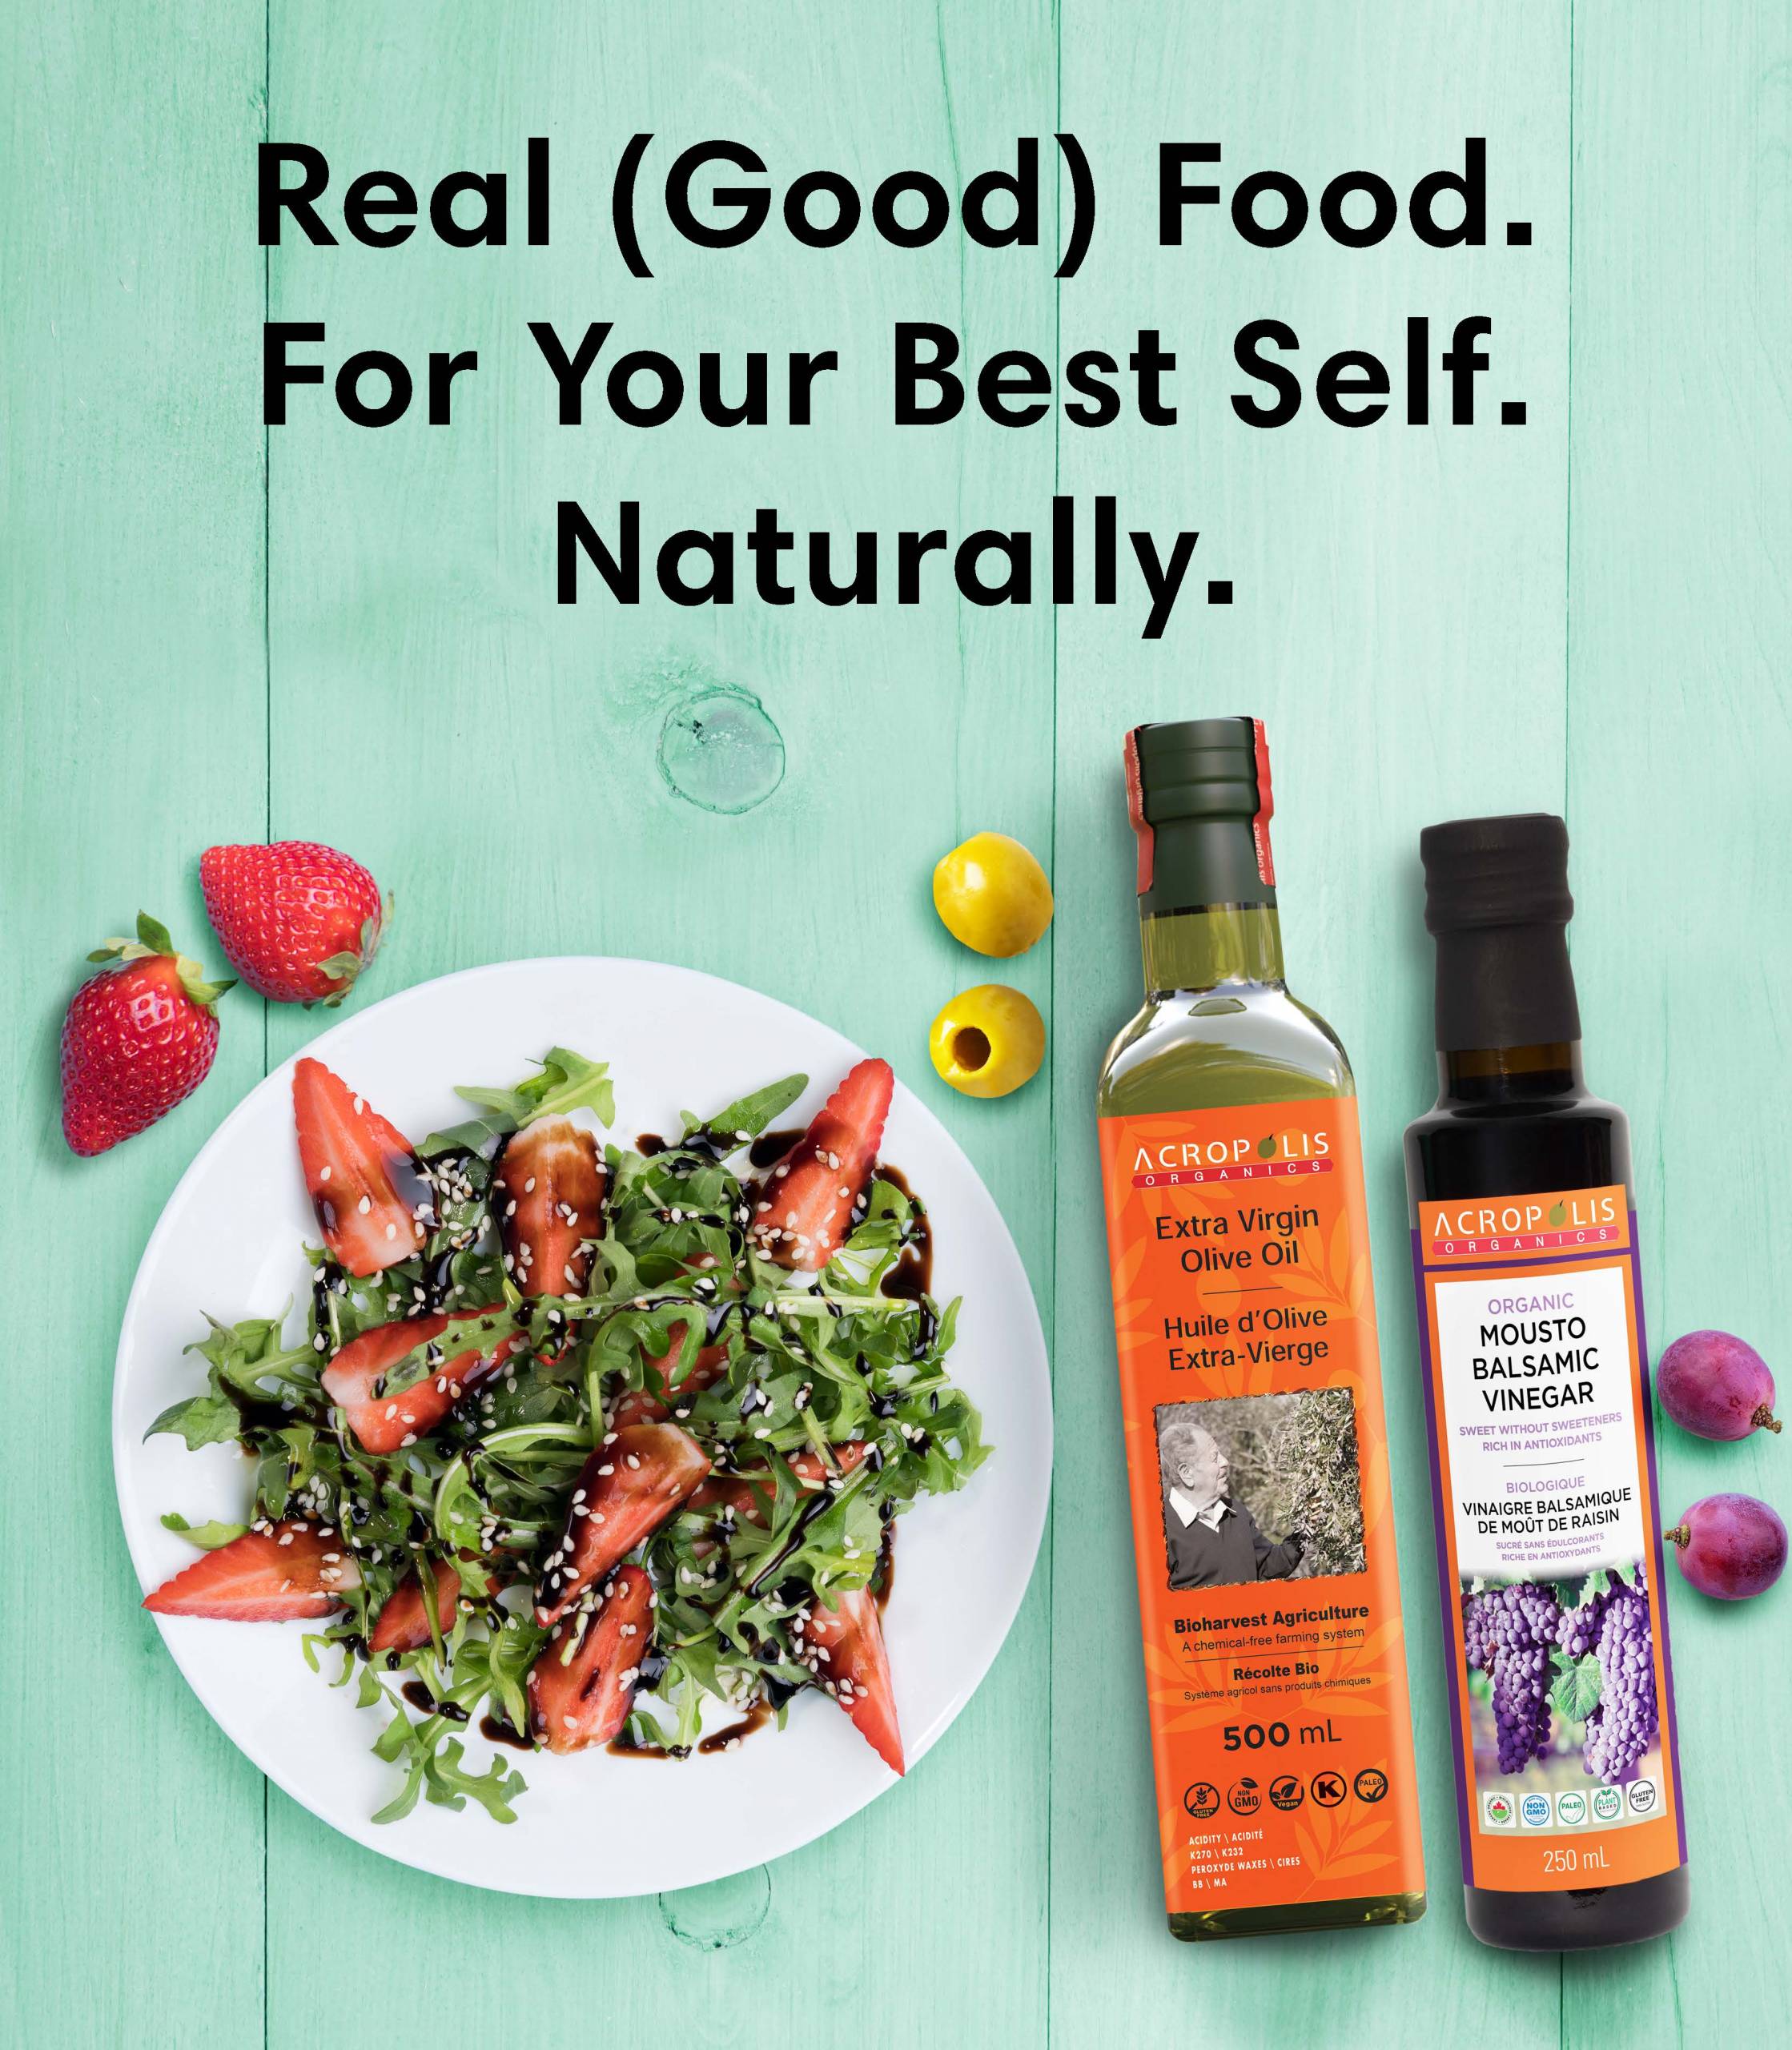 Acropolis Organics Bioharvest Extra Virgin Olive OIl & Organic Balsamic Vinegar Photo with a green salad on the side and the headline: Real (Good) Food For Your Best Self. Naturally.